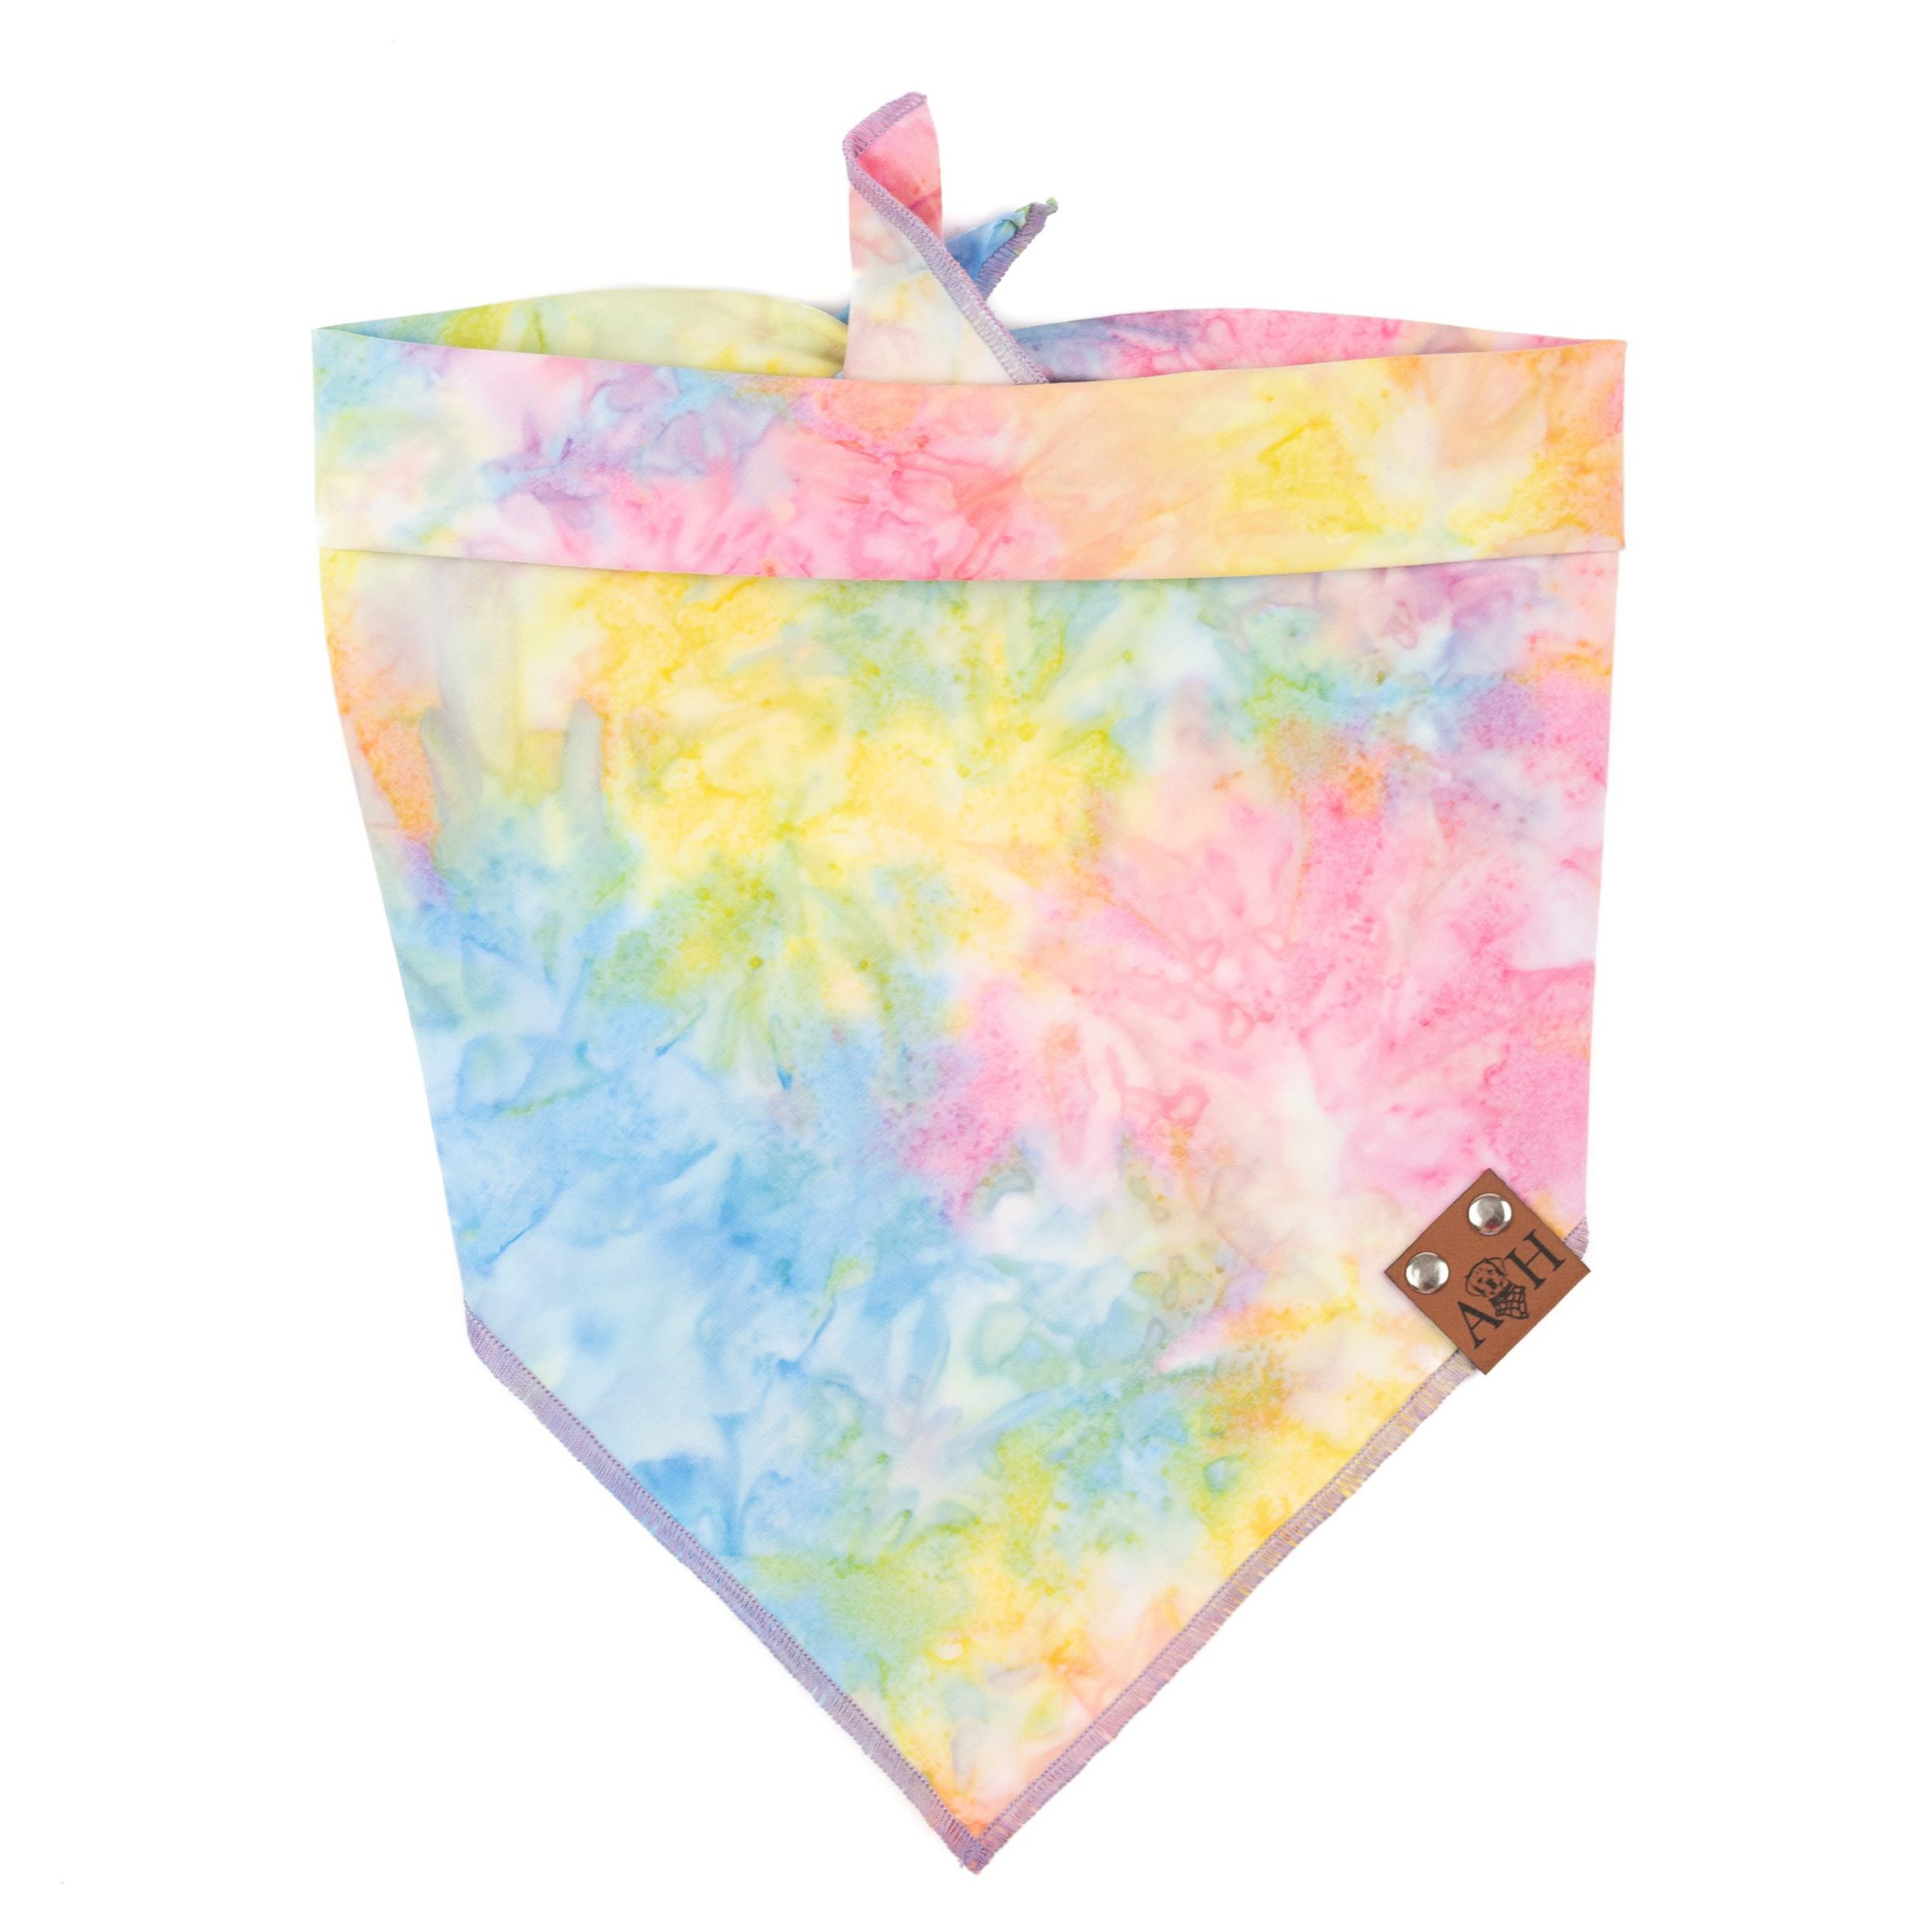 Rainbow Dream Dog Bandana in pale tied dyed yellow, pink, blue